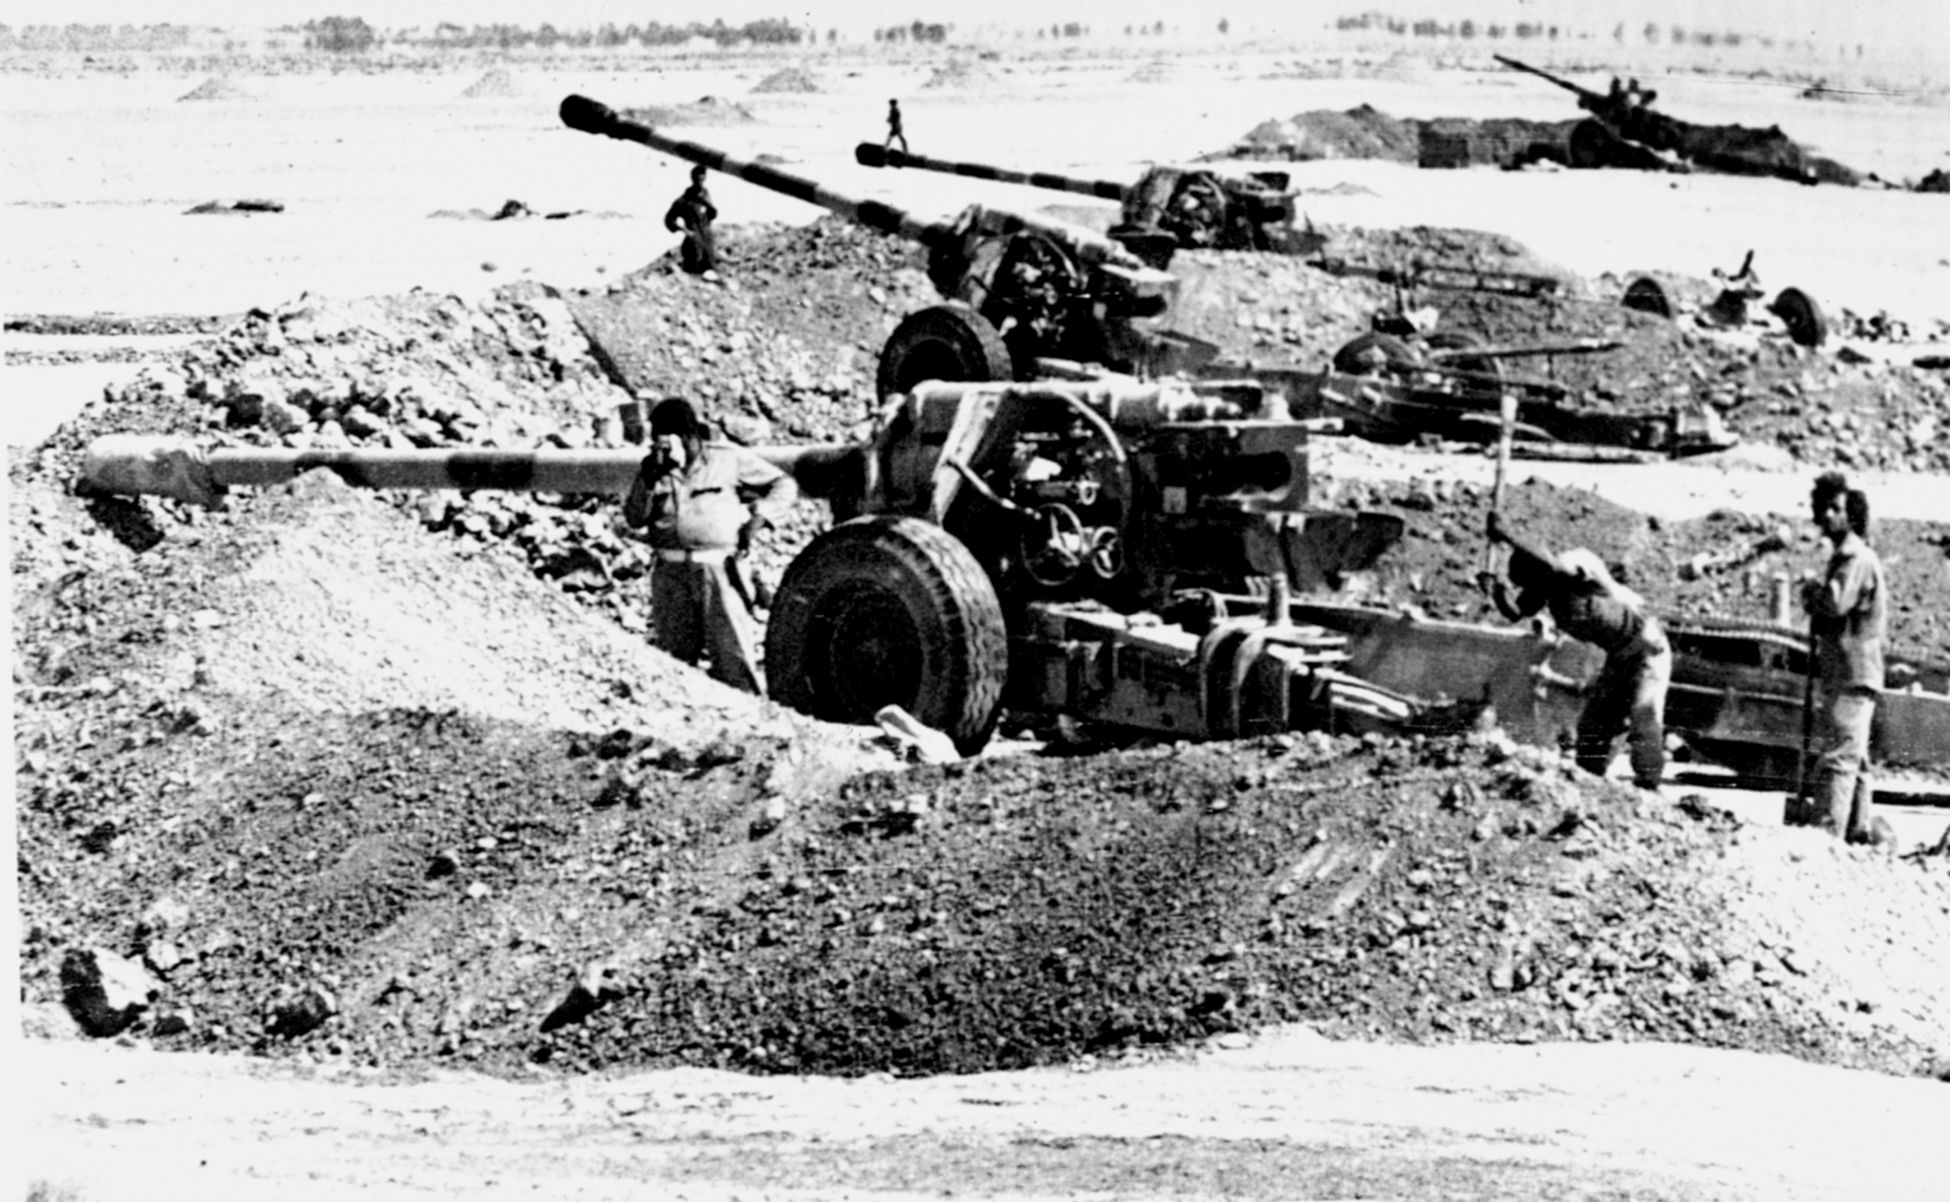 Iraqi artillerymen dig in during their advance on the Iranian town of Ahwaz in September 1980.